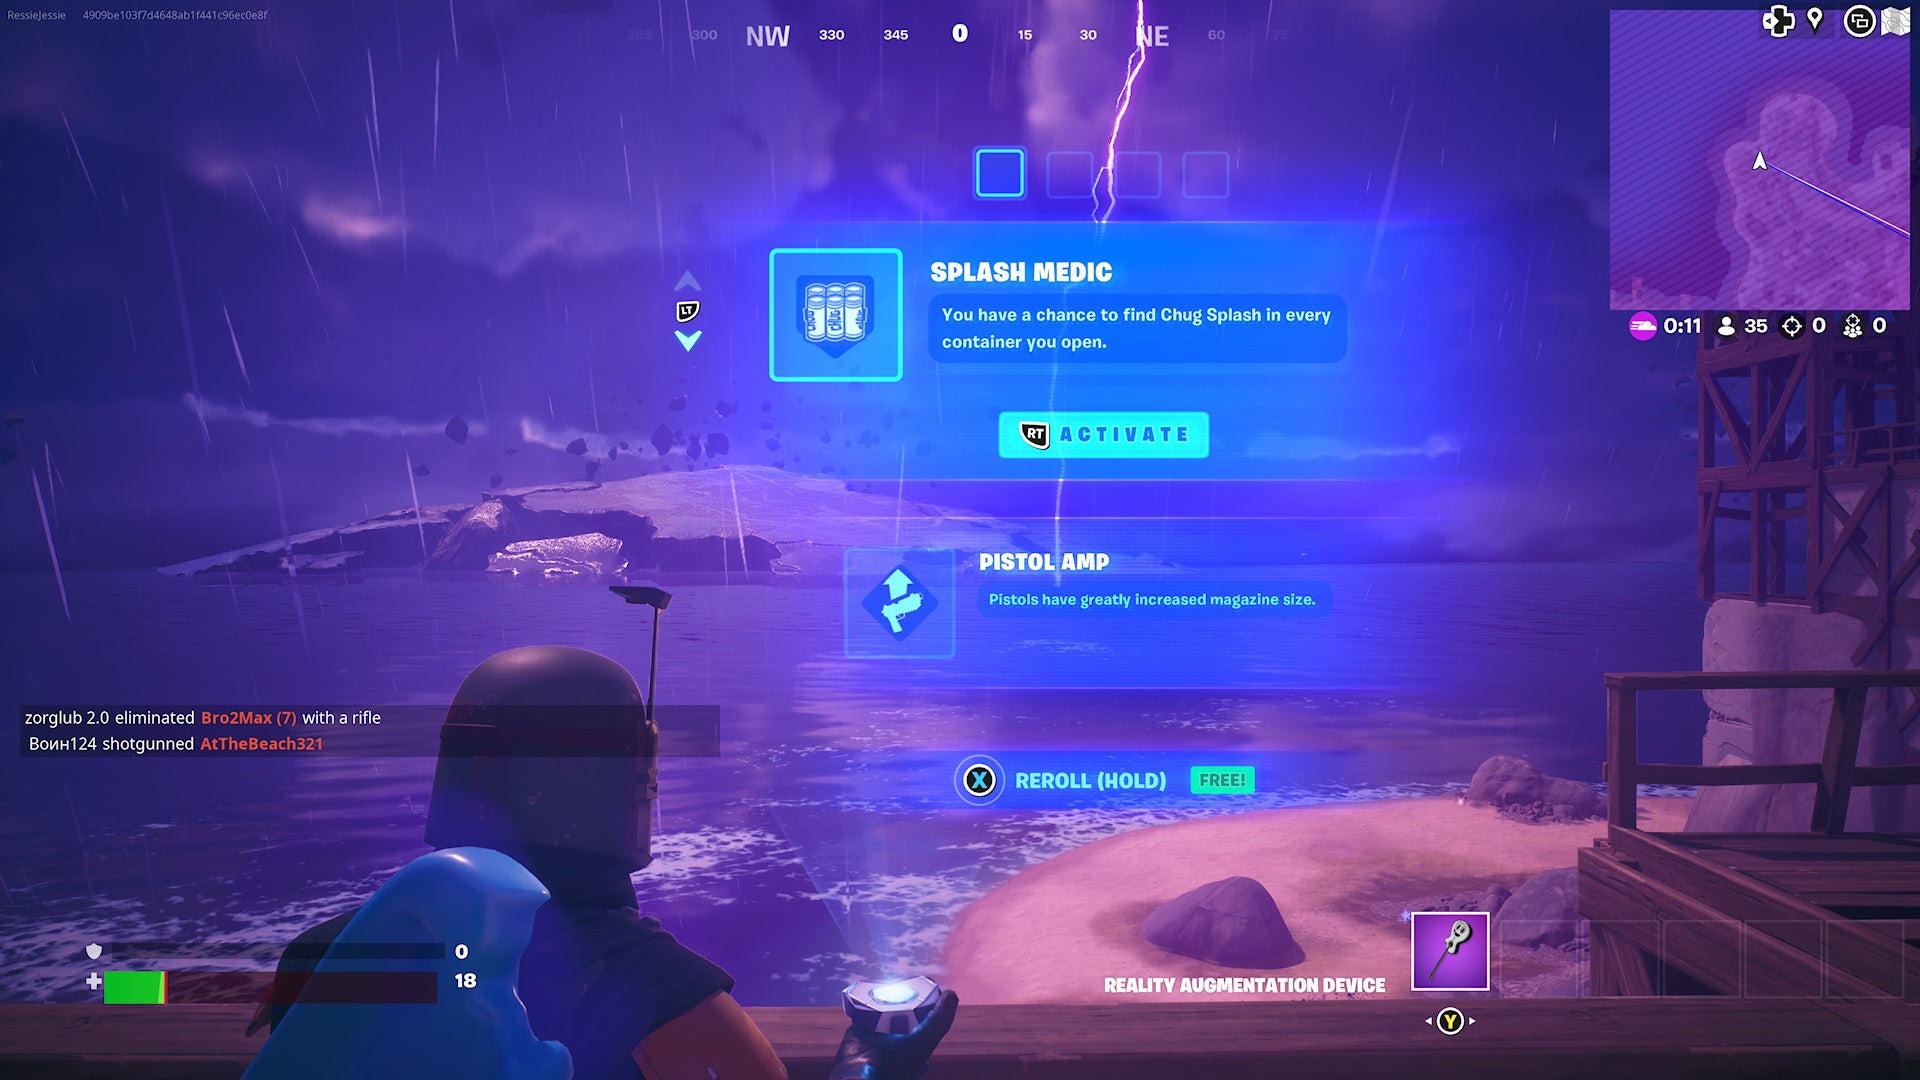 How To Activate An Augment In Fortnite 2